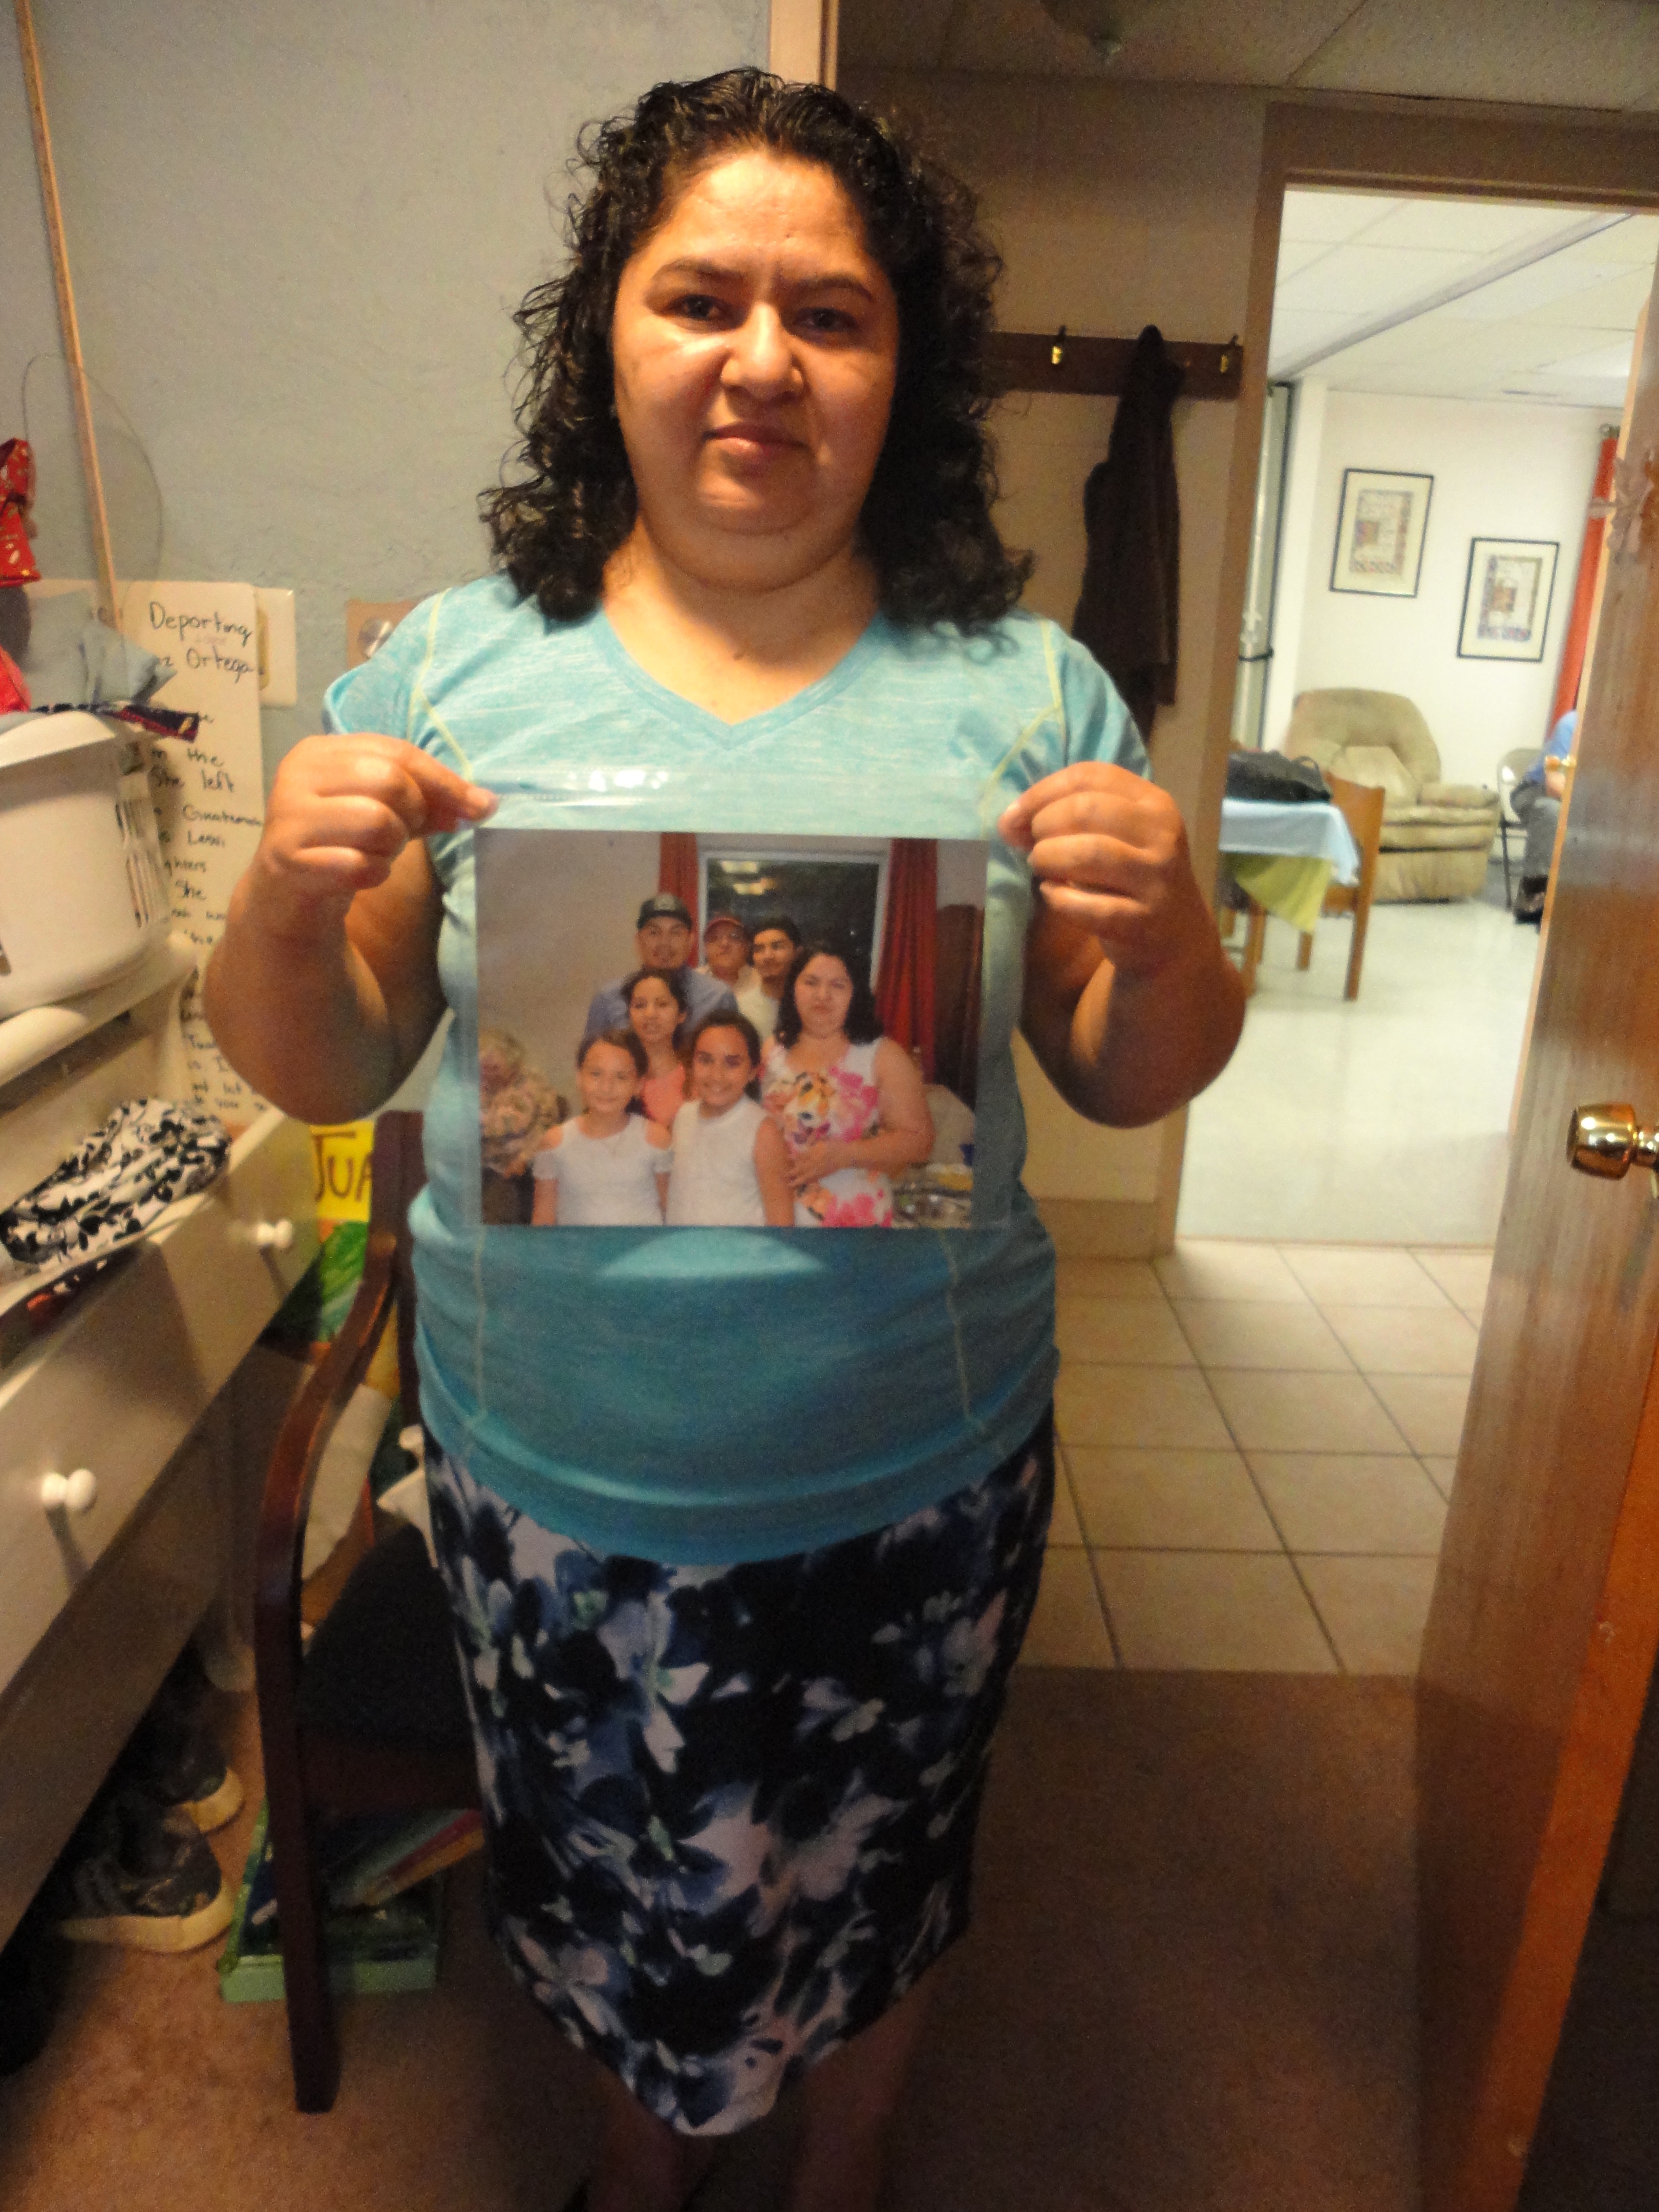 [Photo: Juana Luz Tobar Ortega holds a picture of her family]